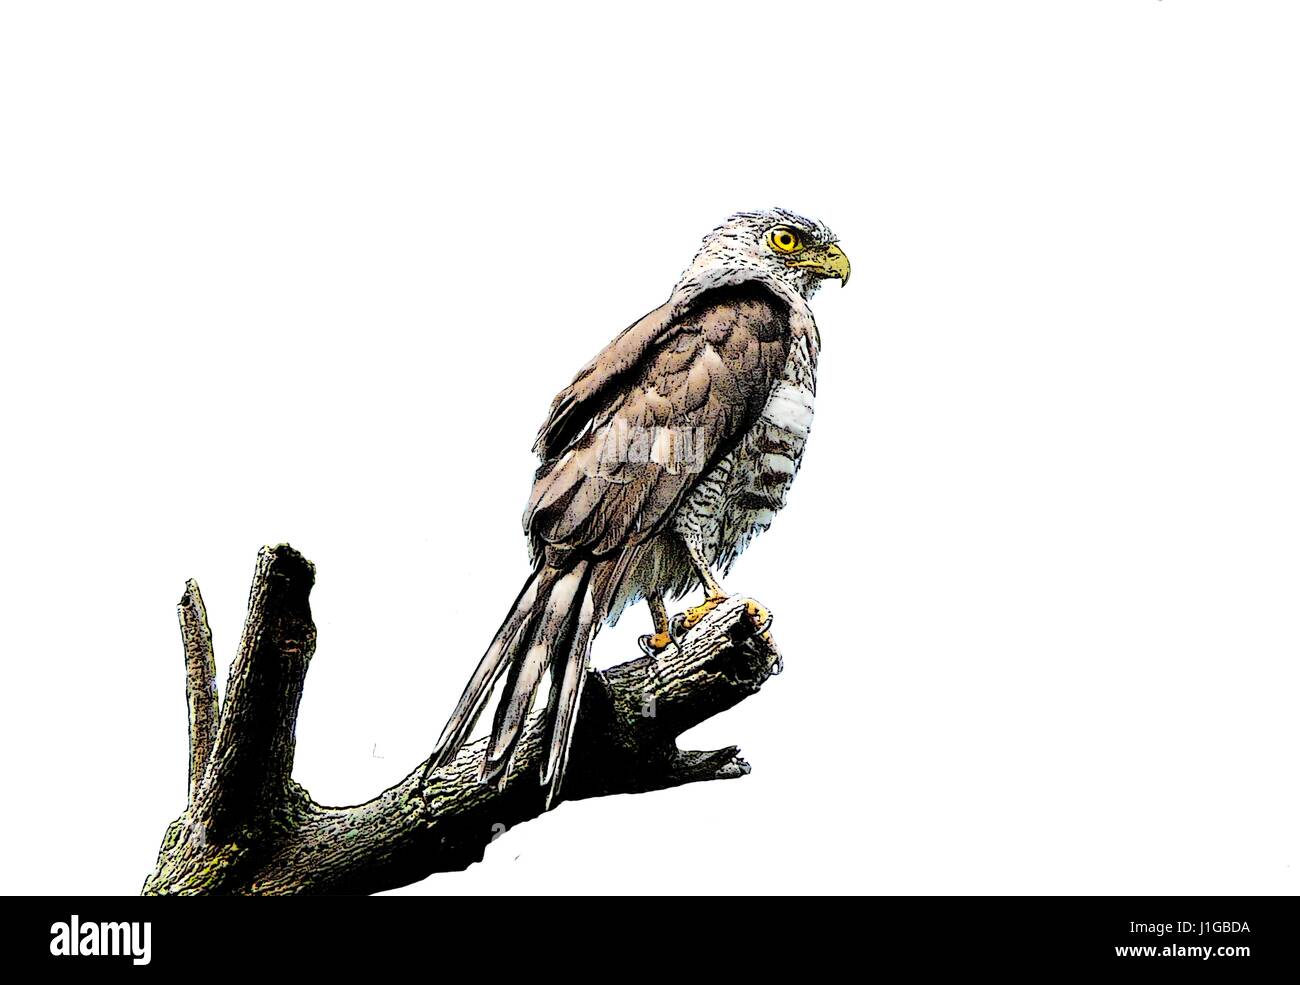 Eagle on dead tree branch over white Stock Photo - Alamy